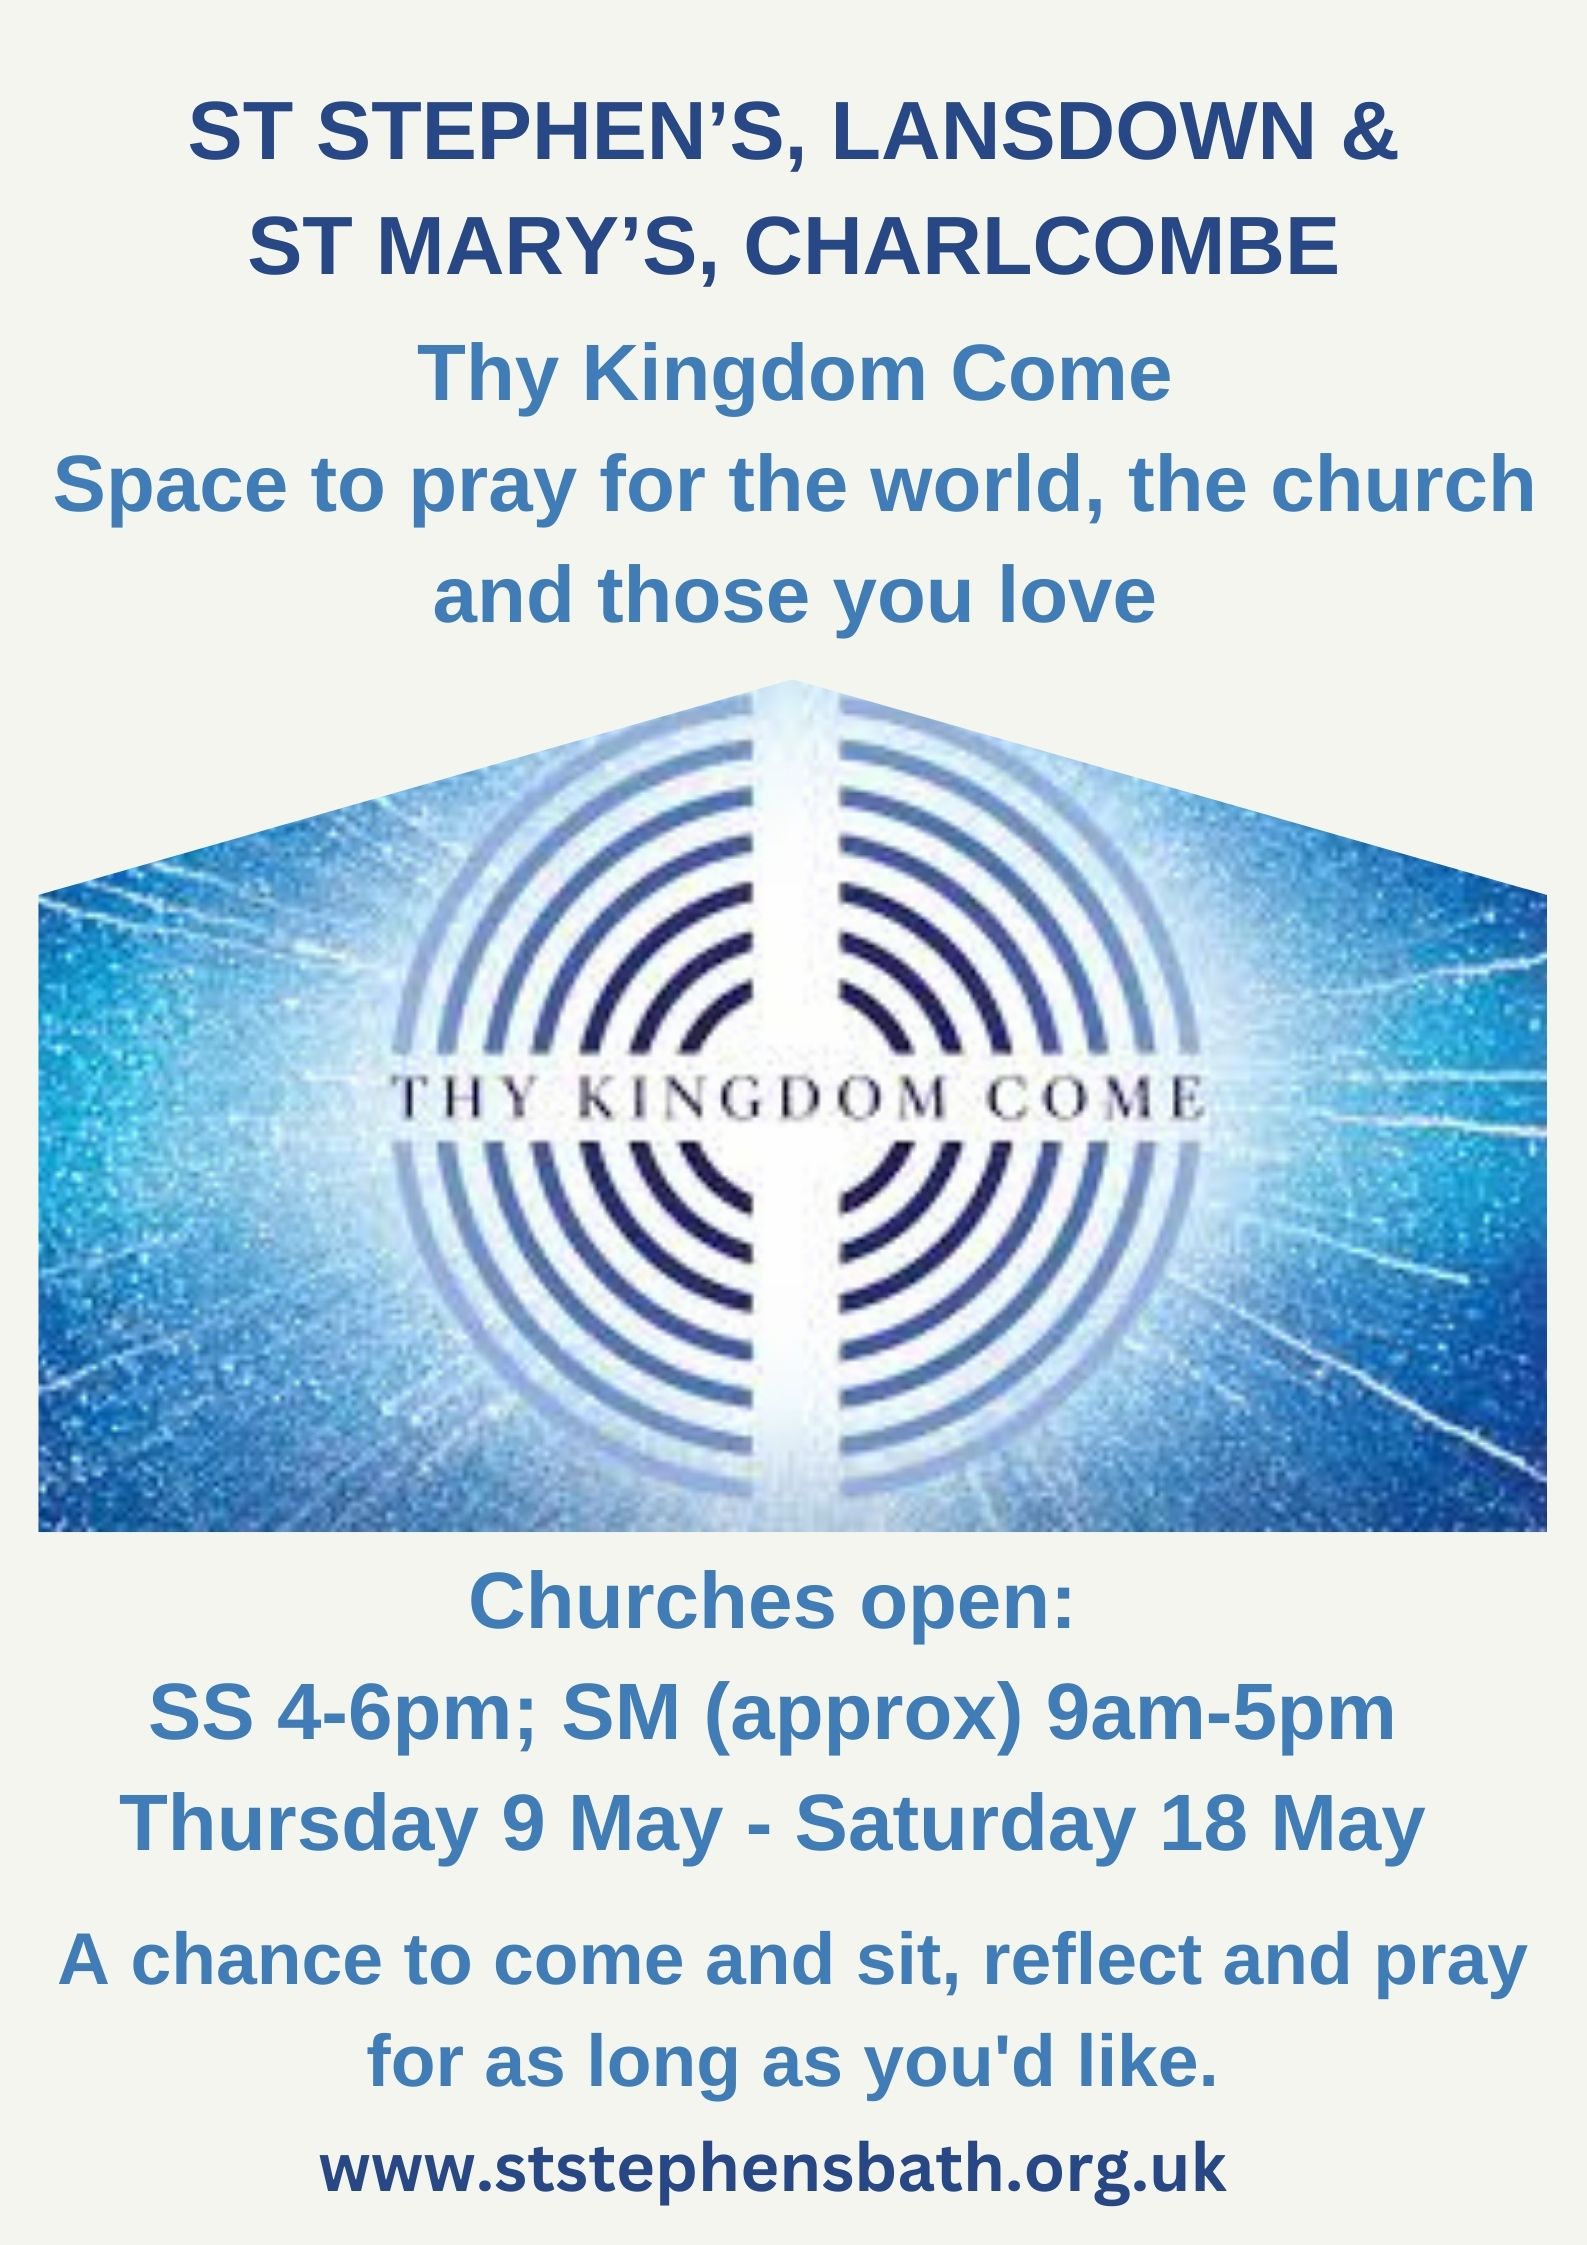 A poster advertising church opening times for prayer during Thy Kingdom Come